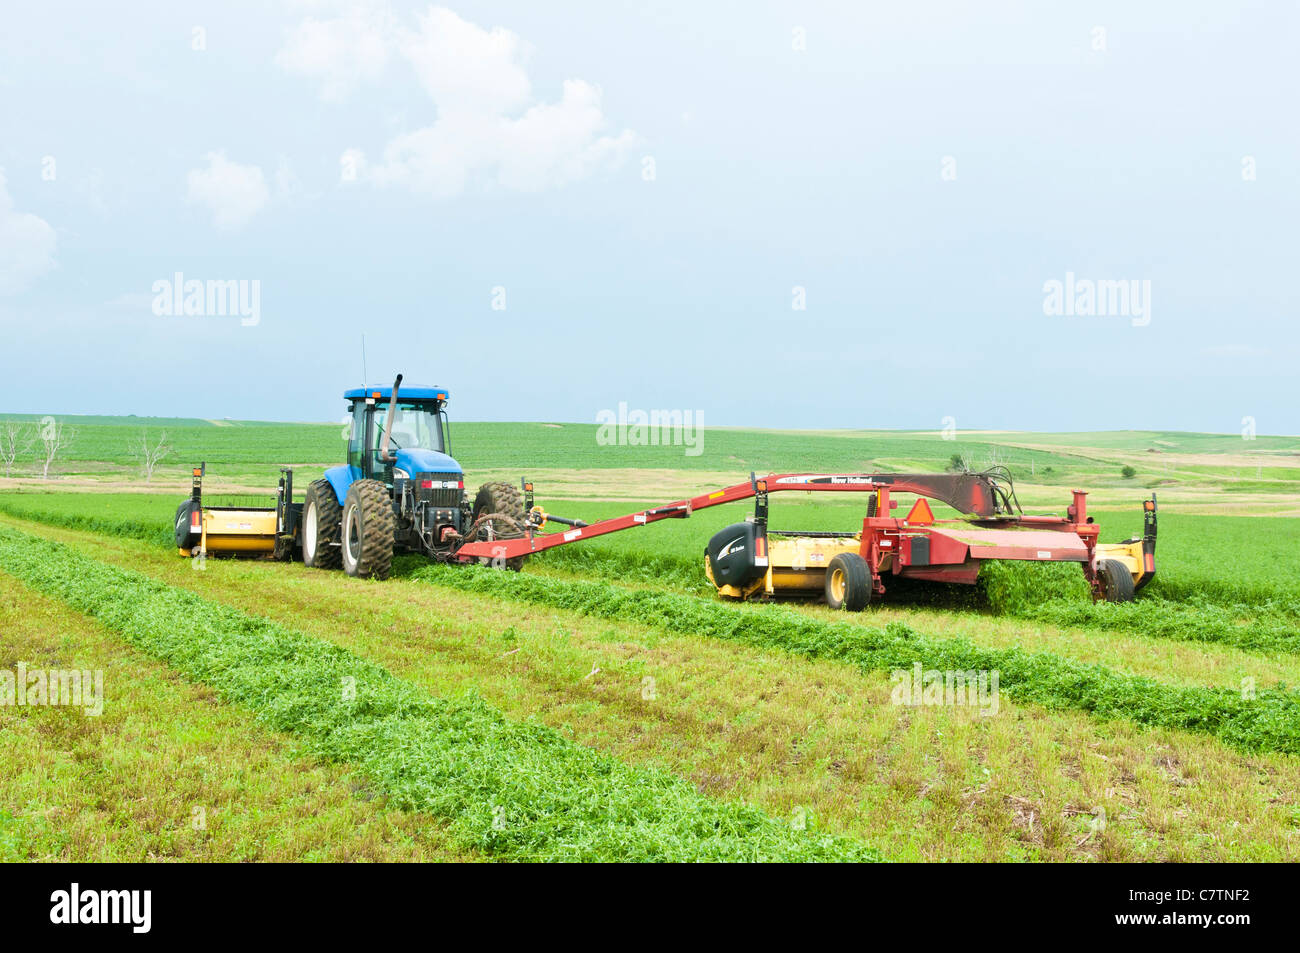 Mature alfalfa is mowed and windrowed on a farm in South Dakota. Stock Photo